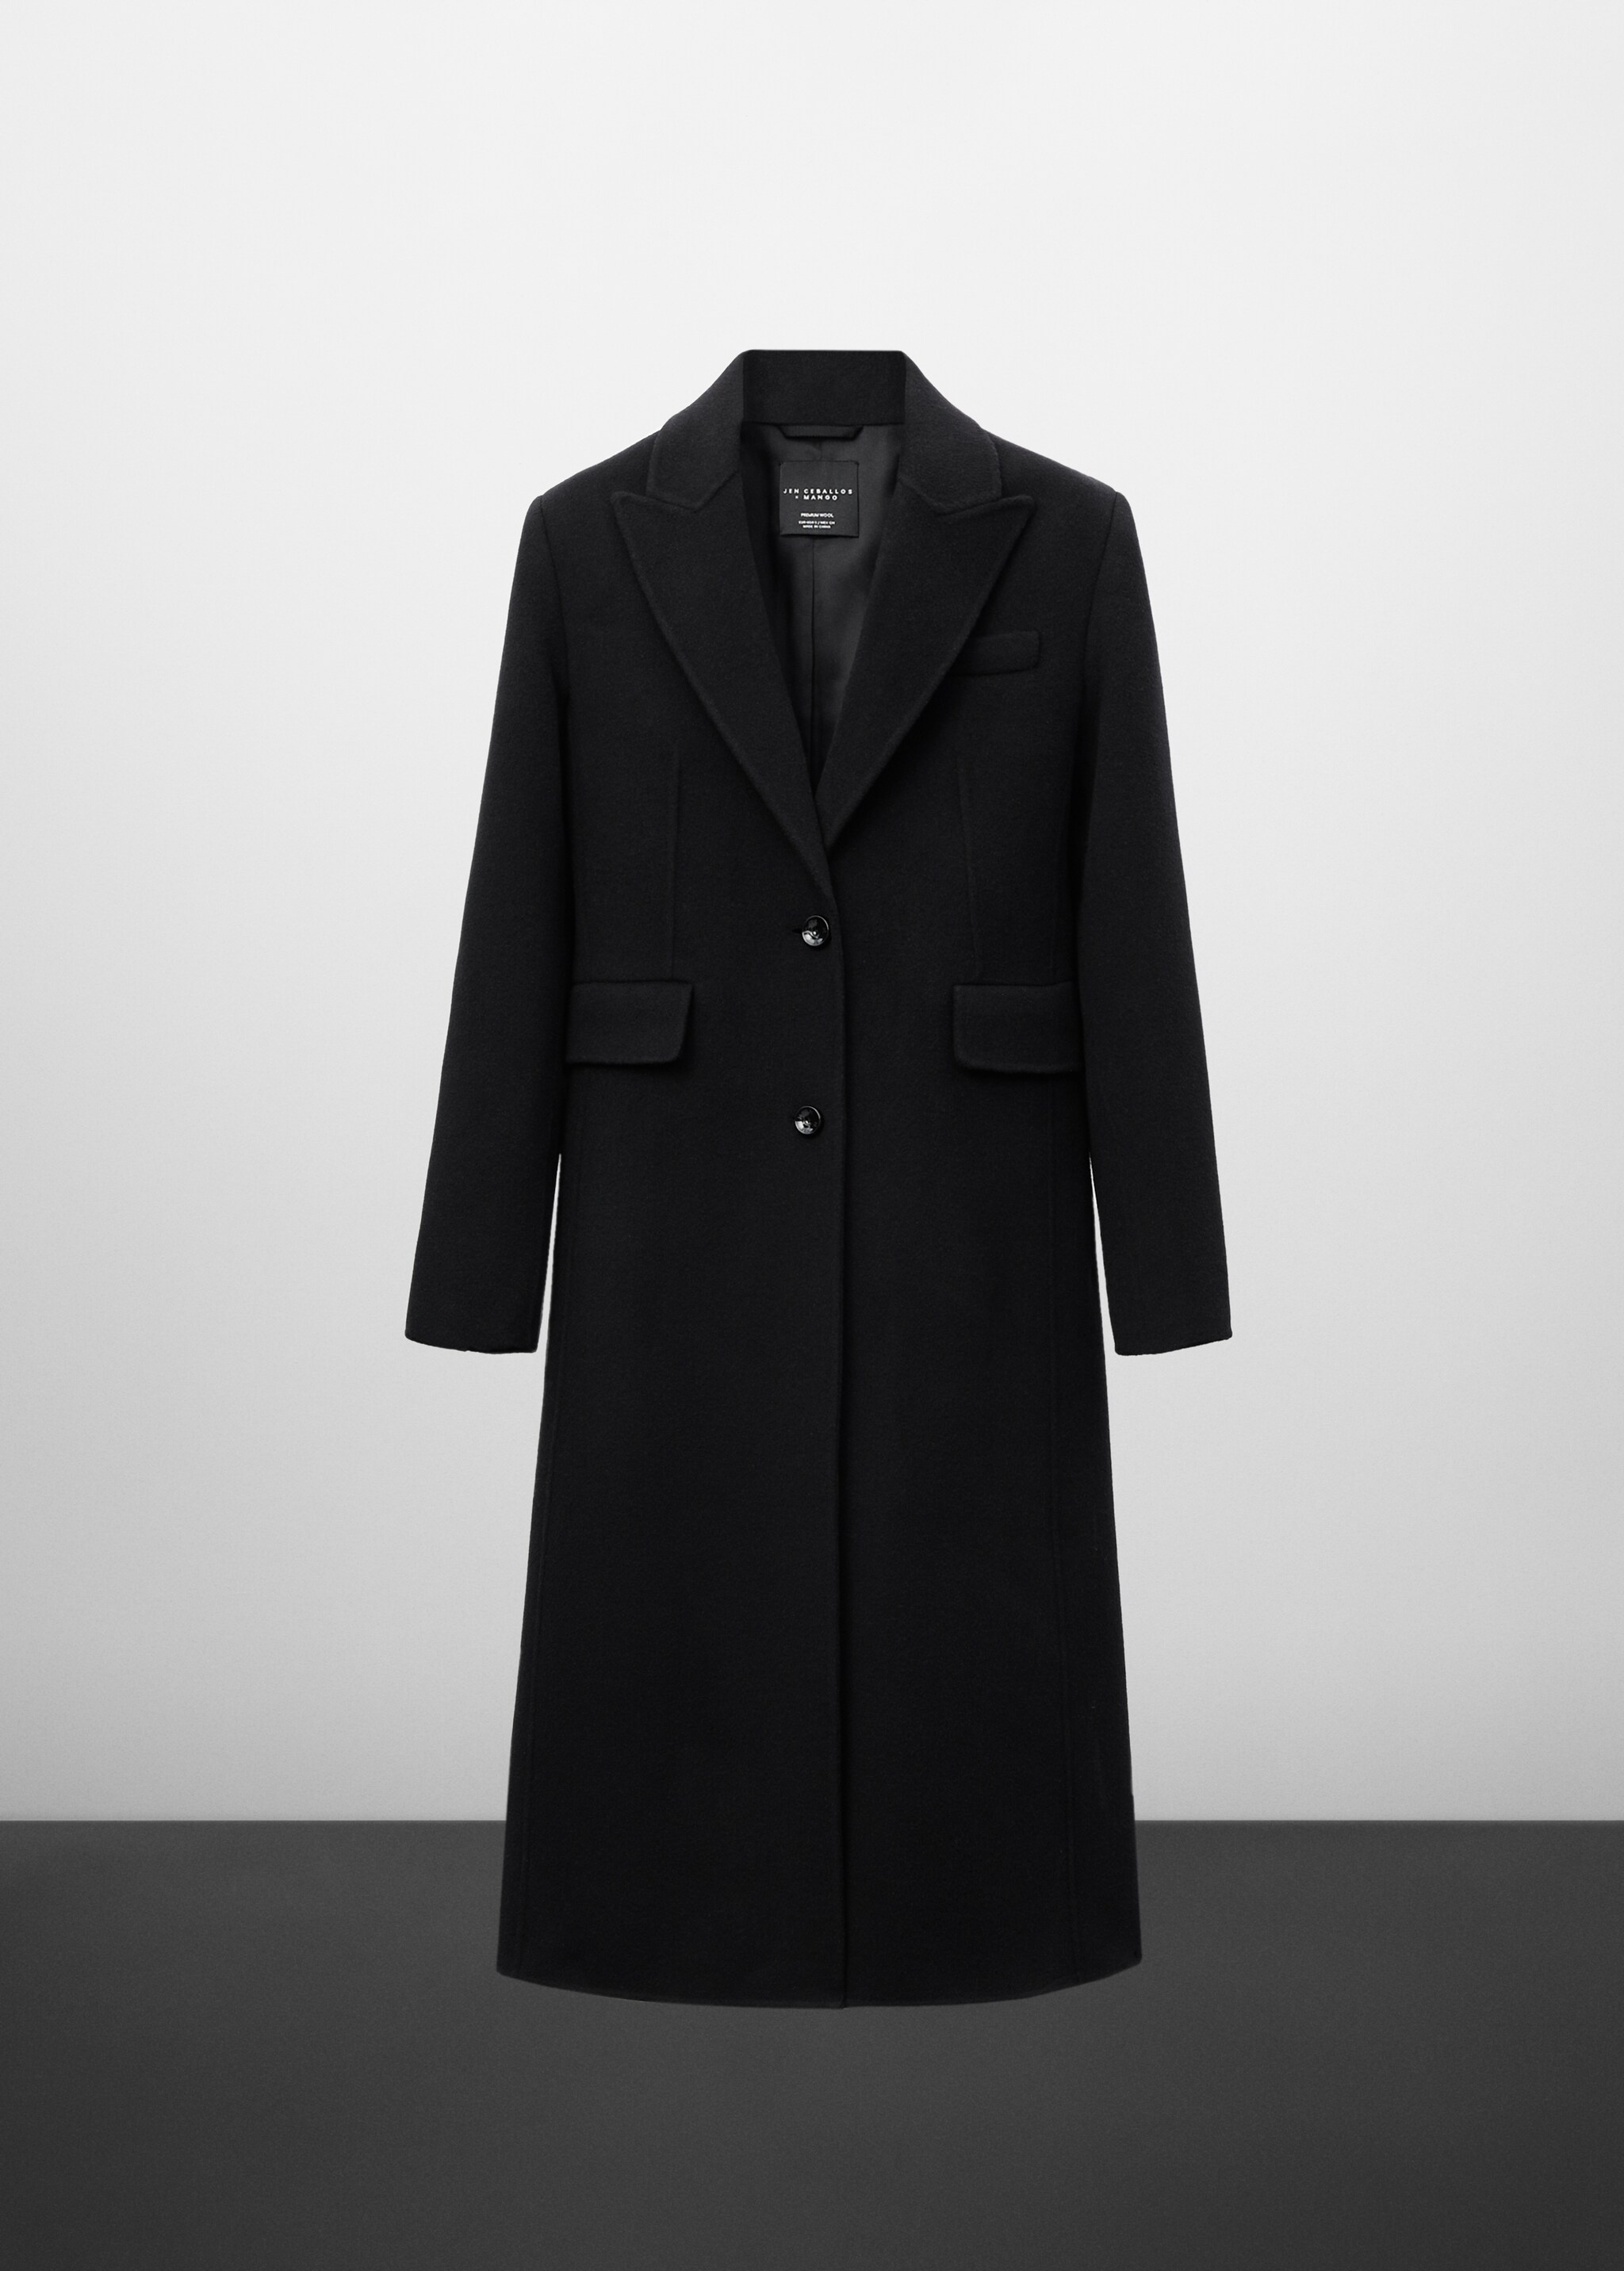 Structured cashmere wool coat - Article without model